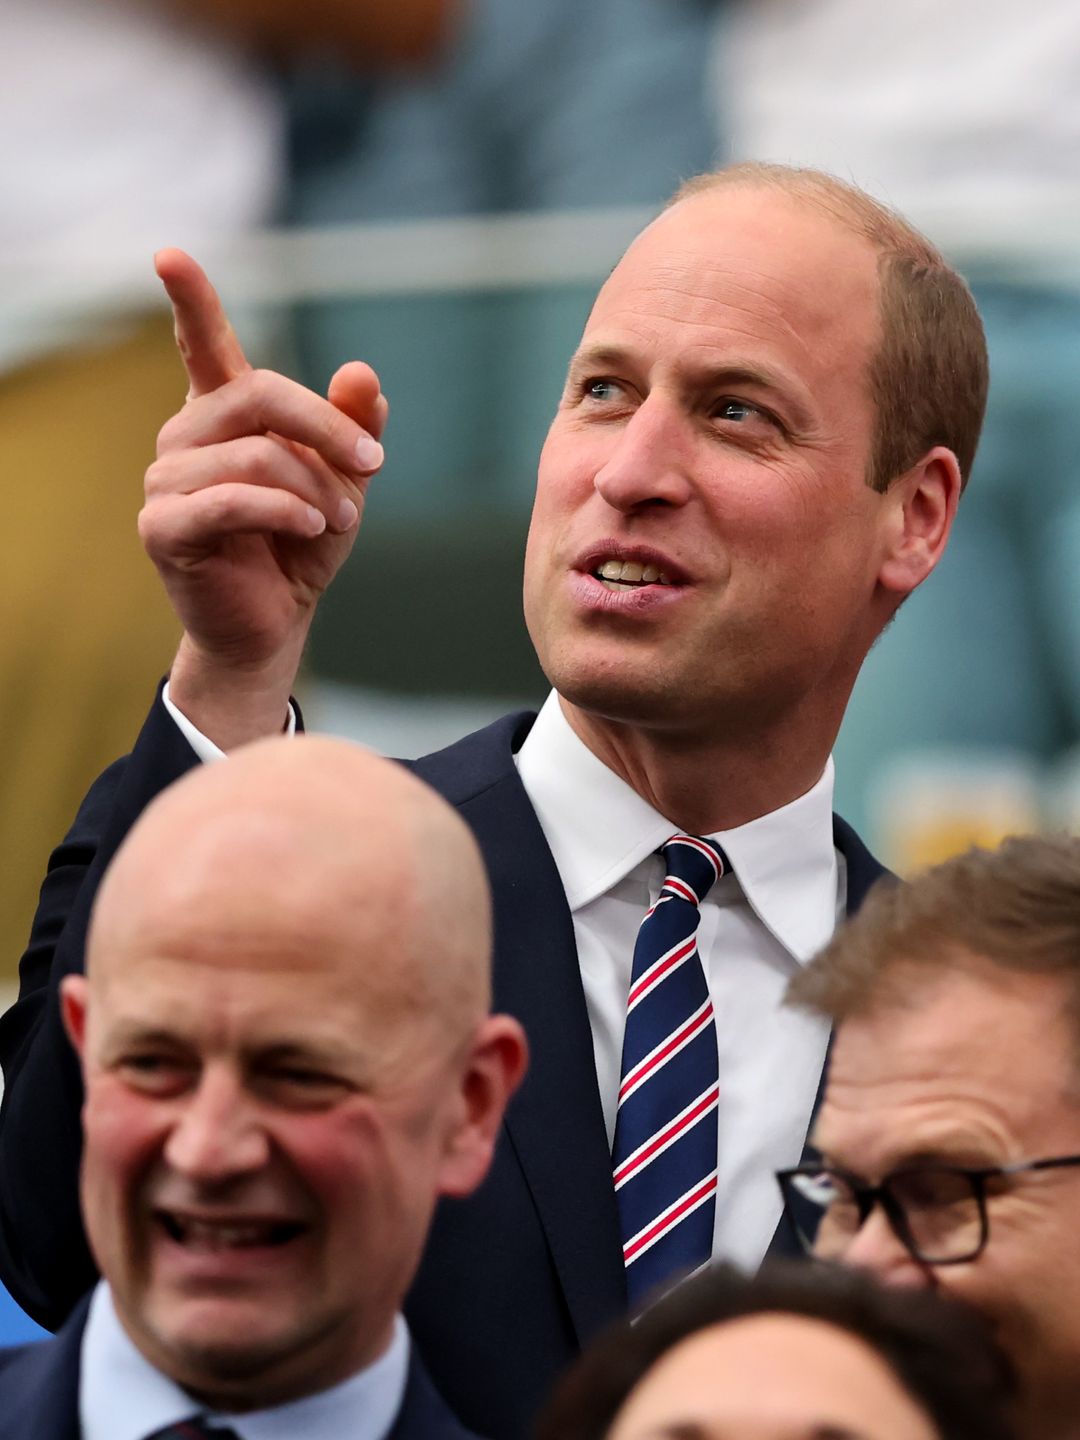 Prince William stands and gestures with King Frederick during a football match